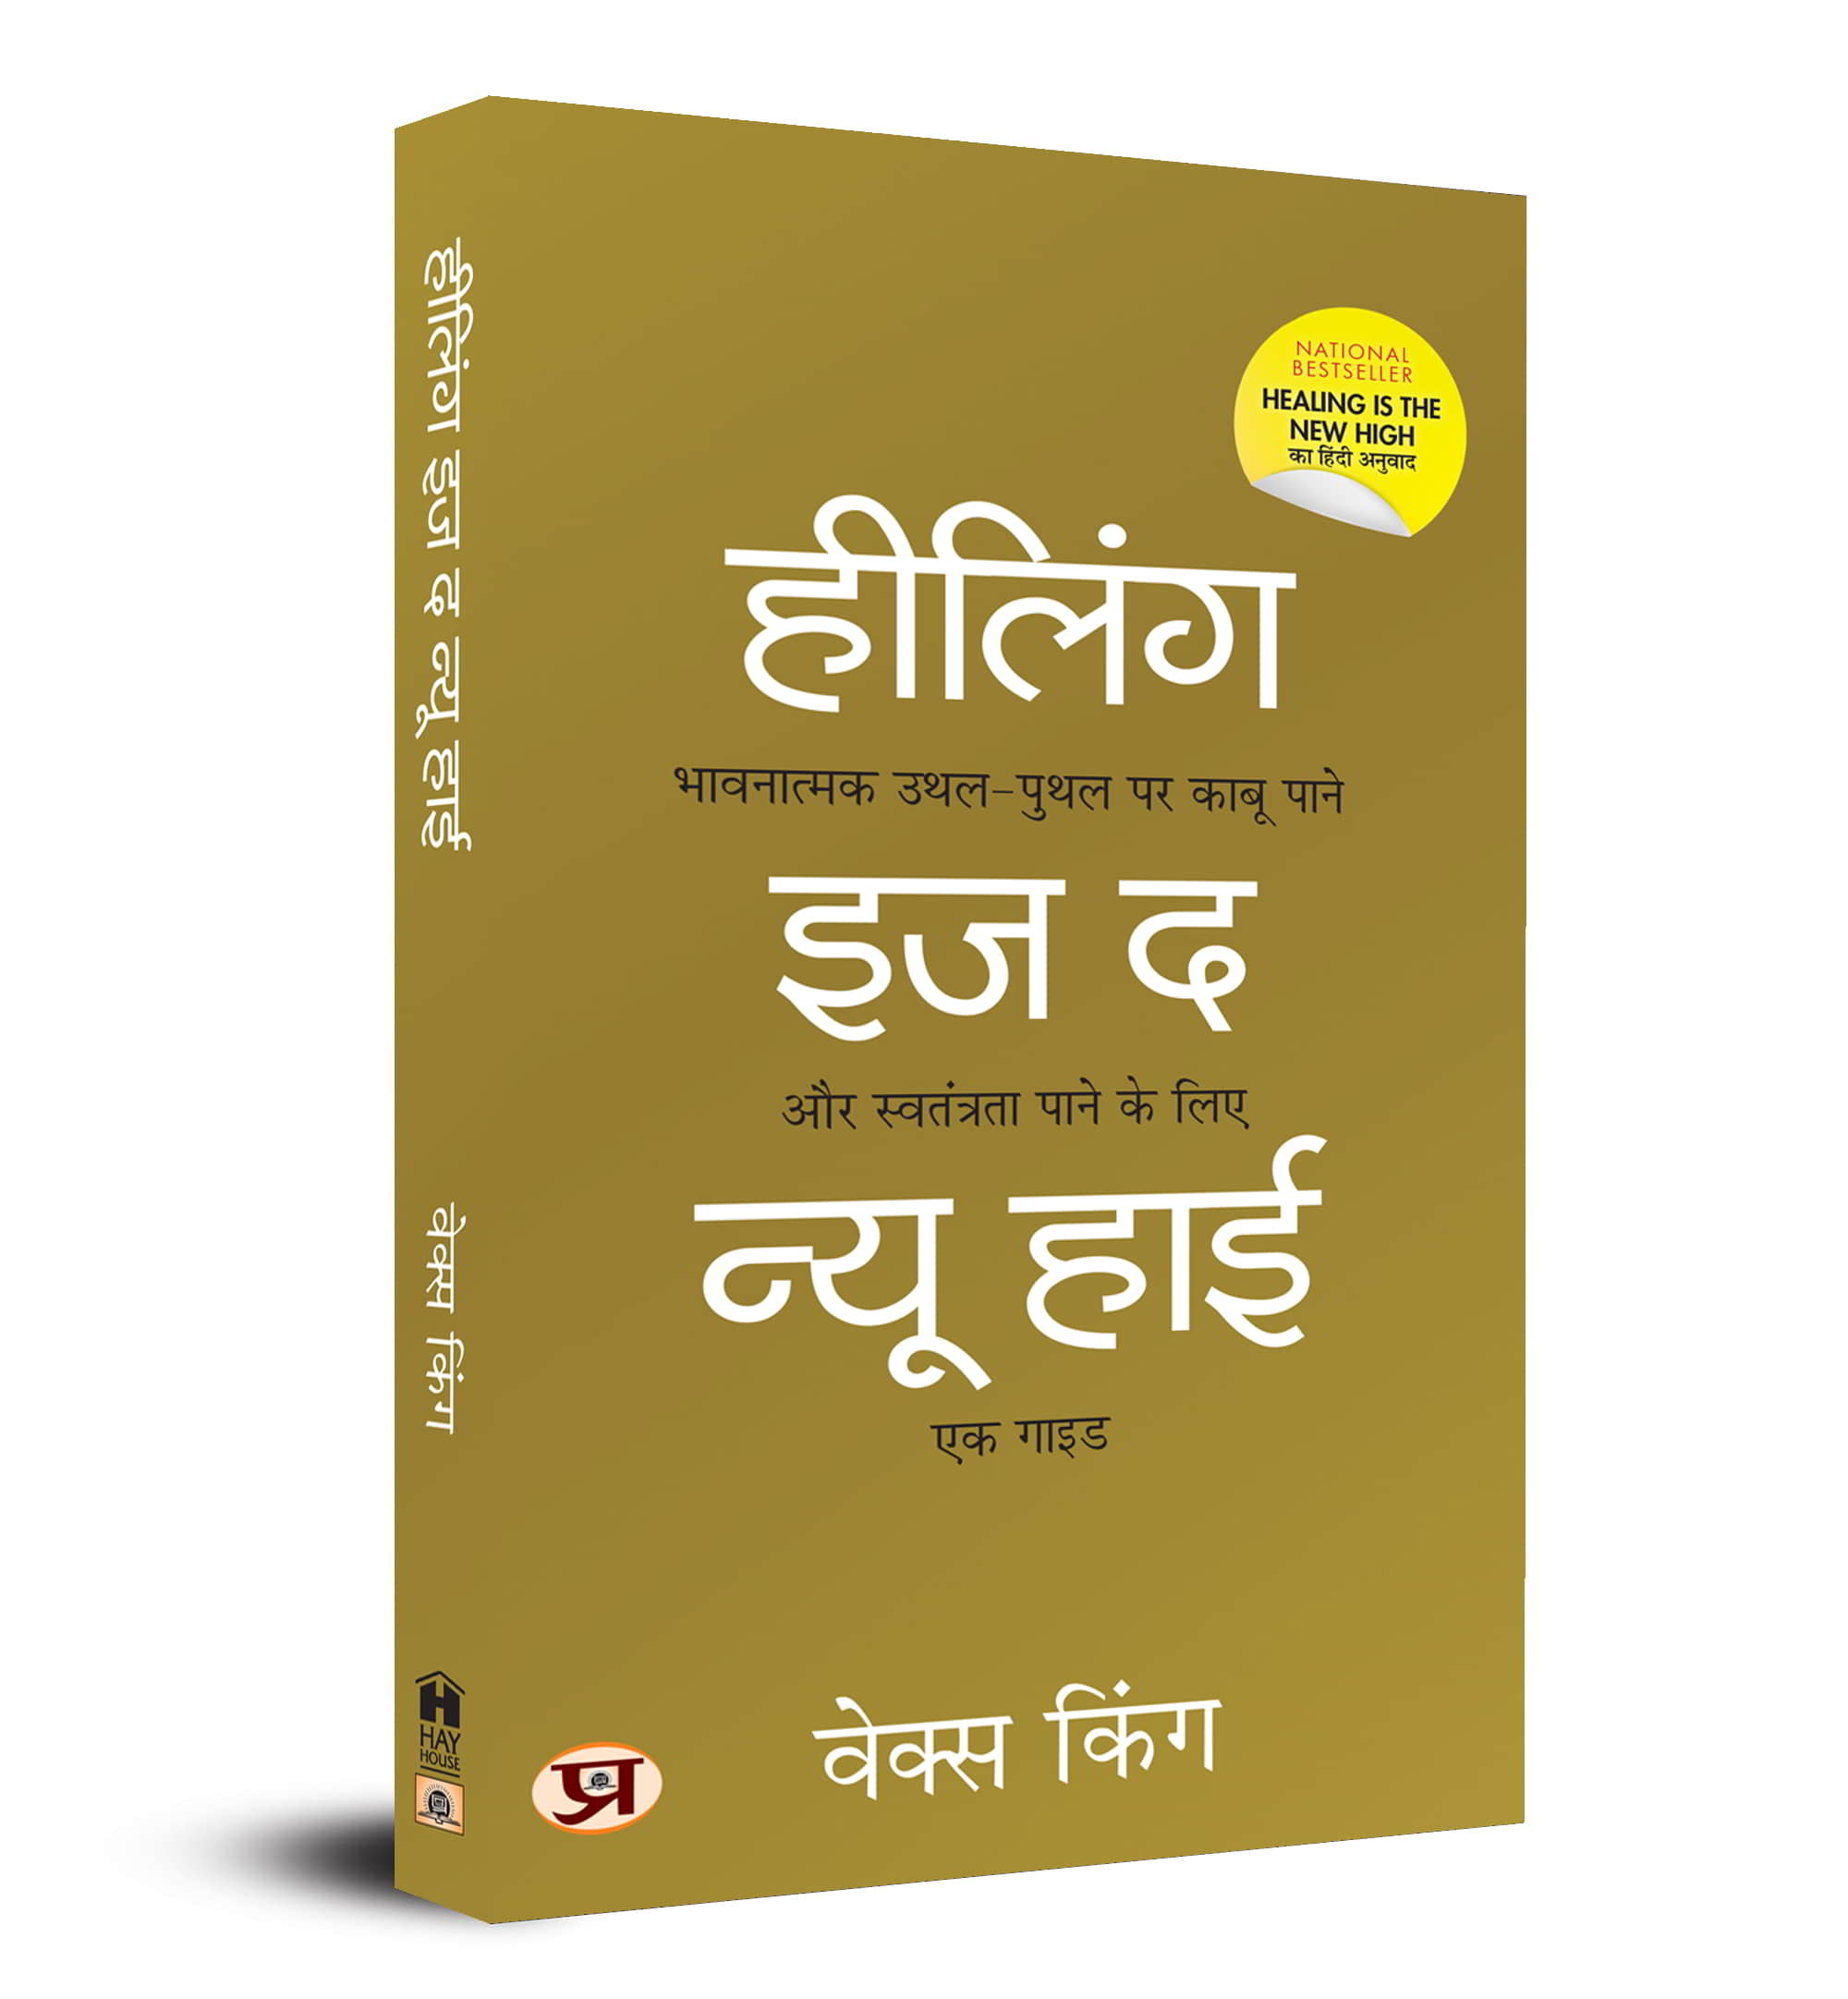 Hindi Translation Of Healing Is The New High